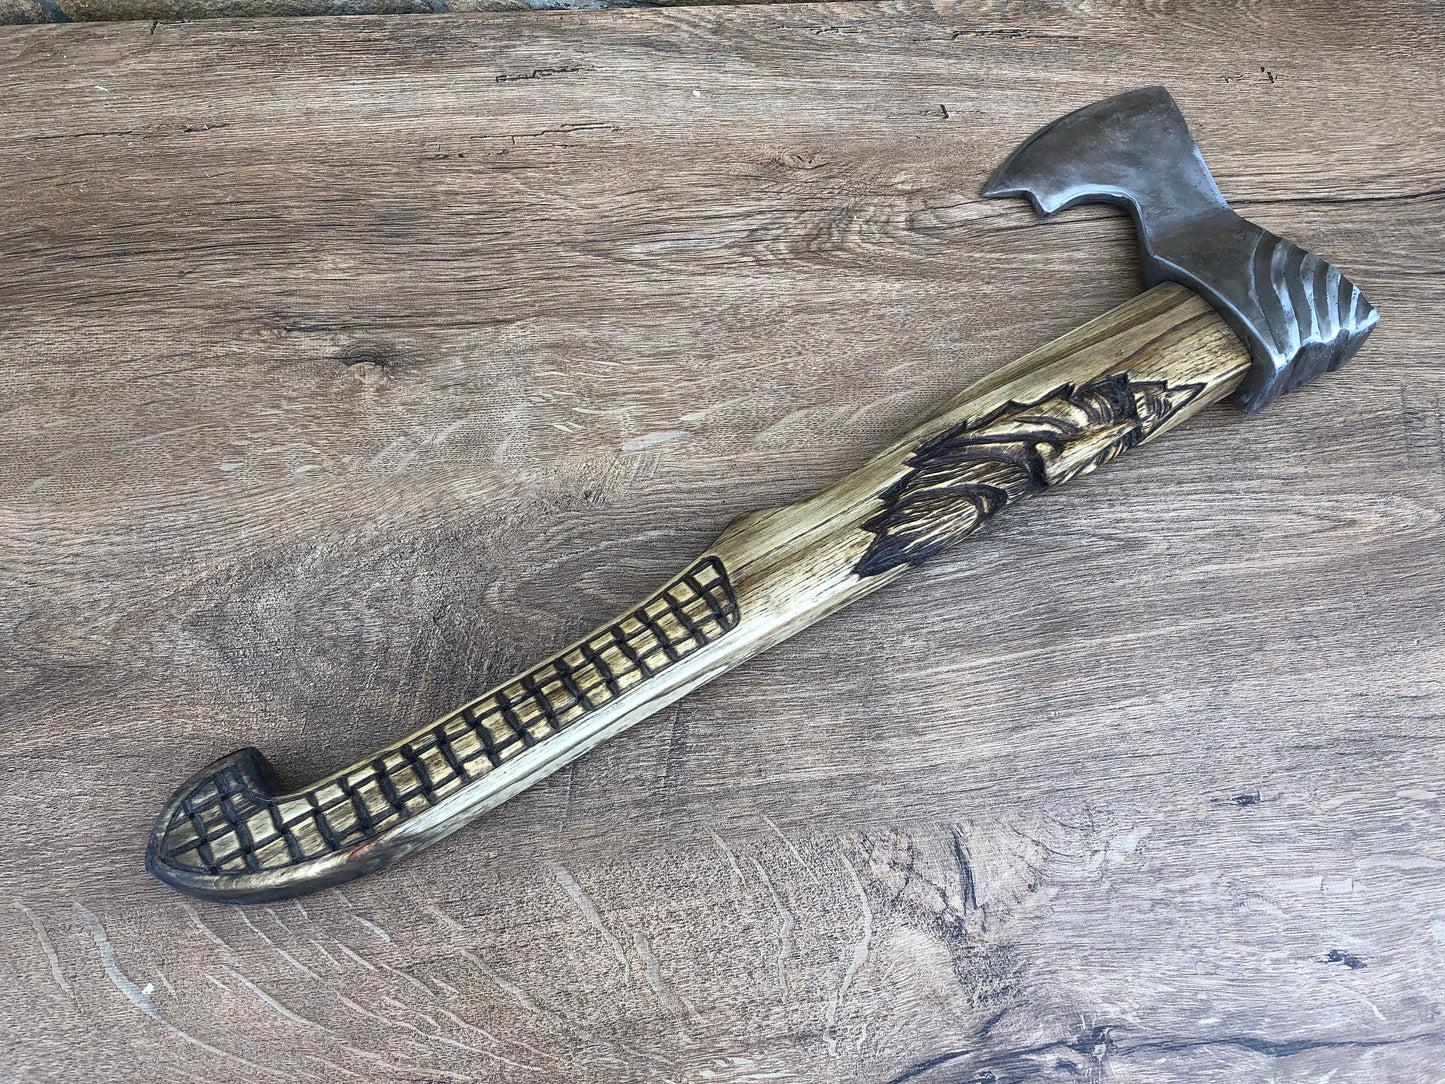 Axe, best man gift, his birthday gift, viking axe, tools, handyman tool, handyman gift, tool, gift for dad, axes, dads gift, manly gifts